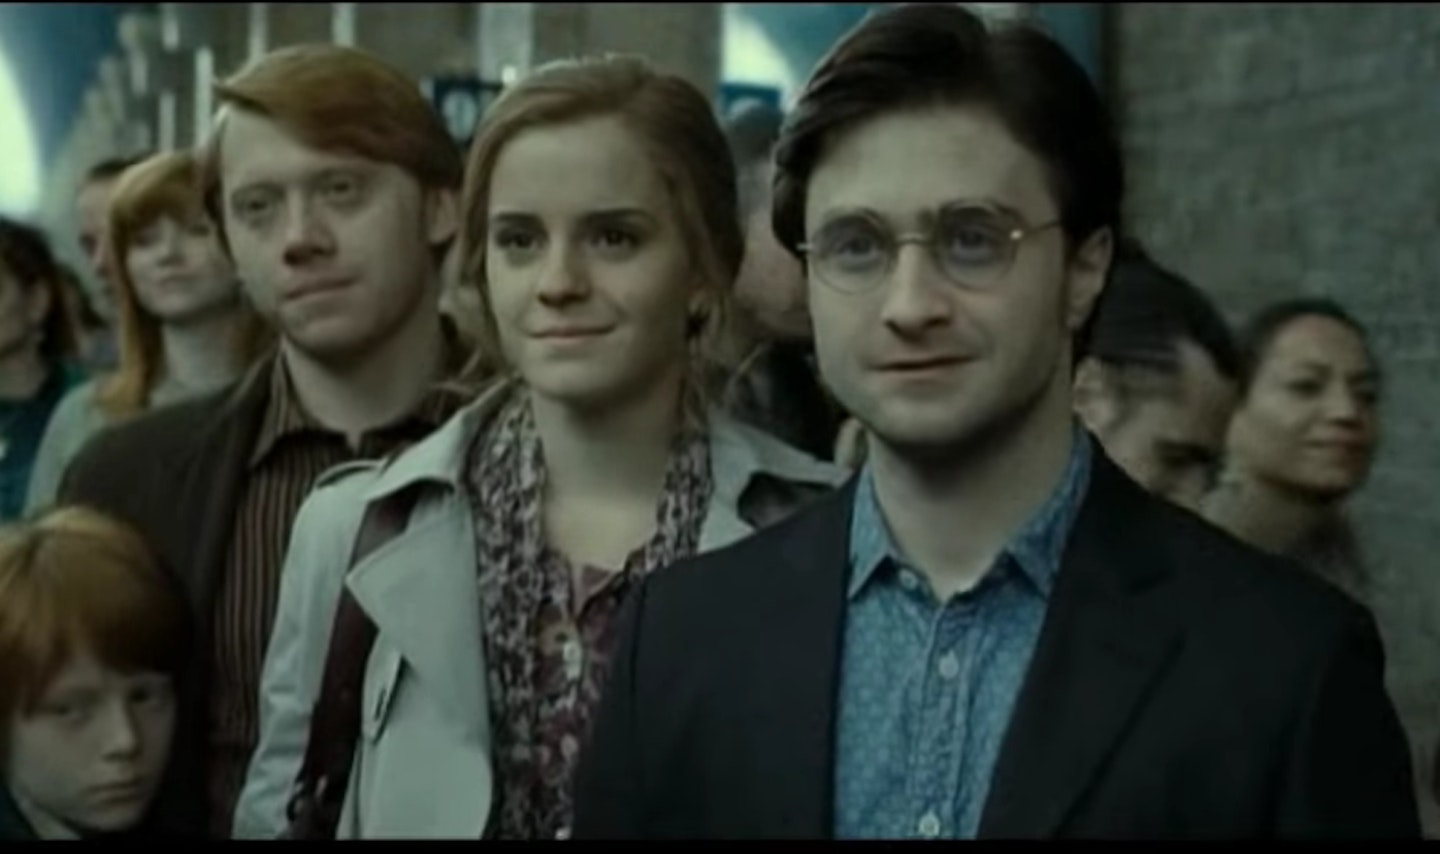 The 'Harry Potter' Cast Reunion Special: Everything We Know